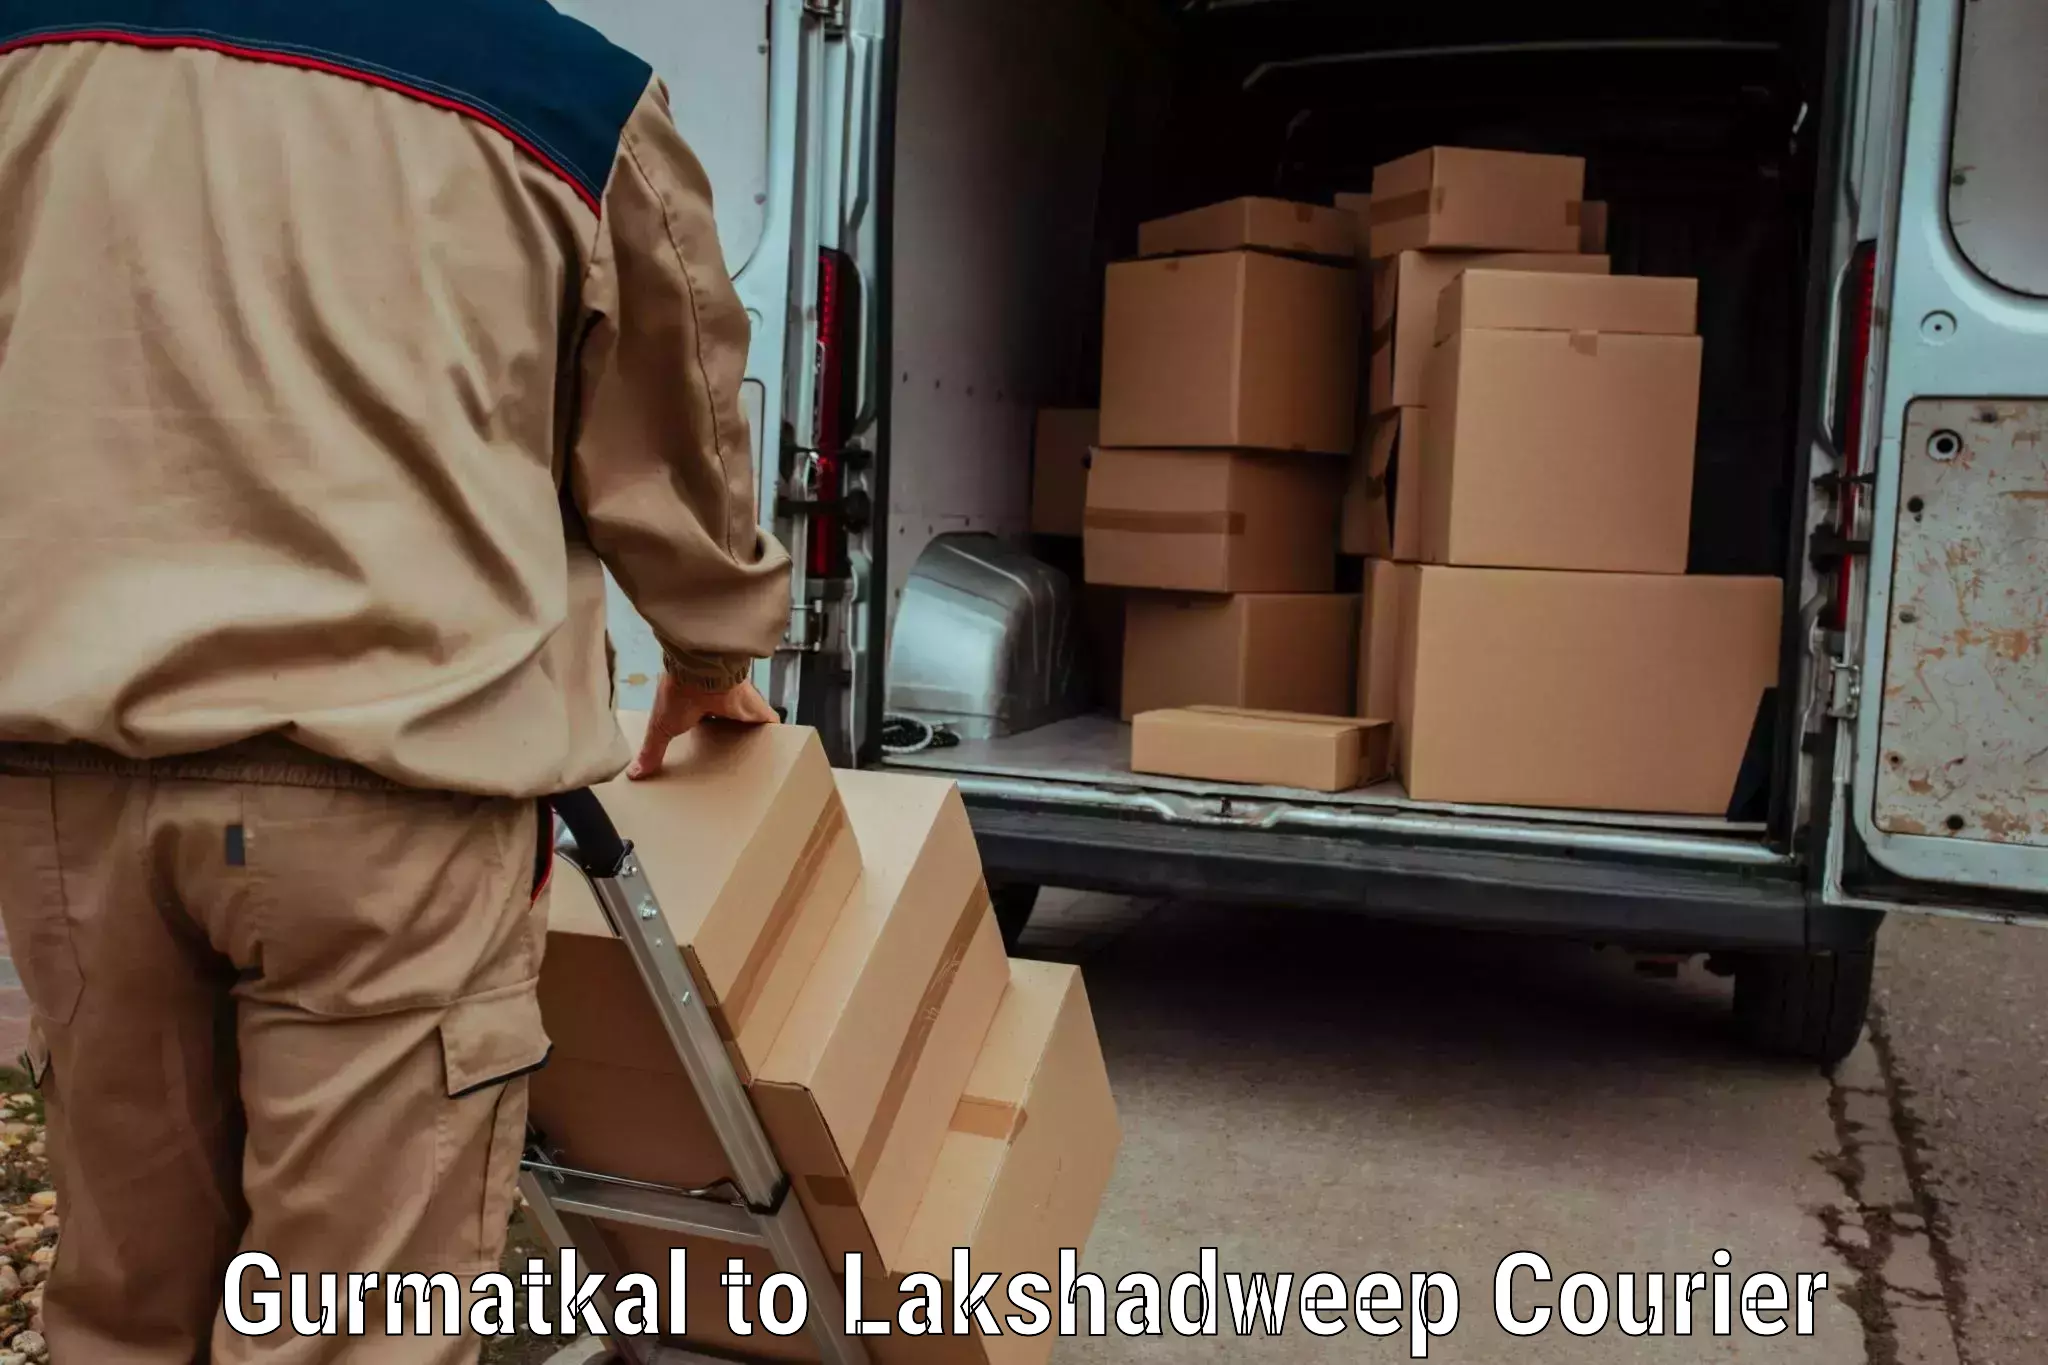 Luggage shipping specialists Gurmatkal to Lakshadweep